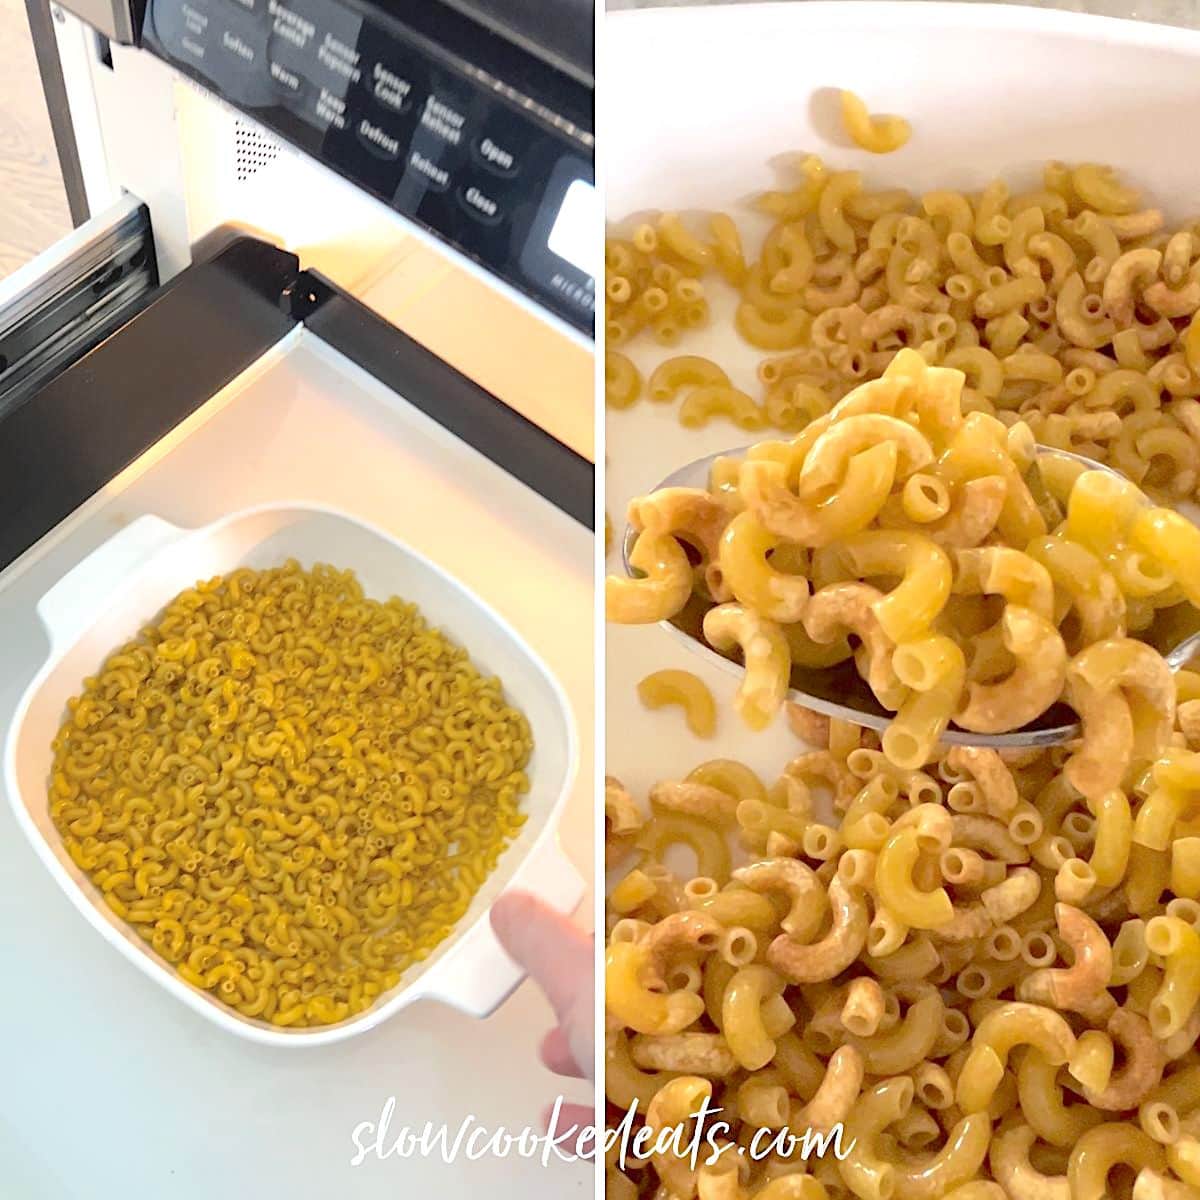 Blistering the dry pasta with olive oil in the microwave.